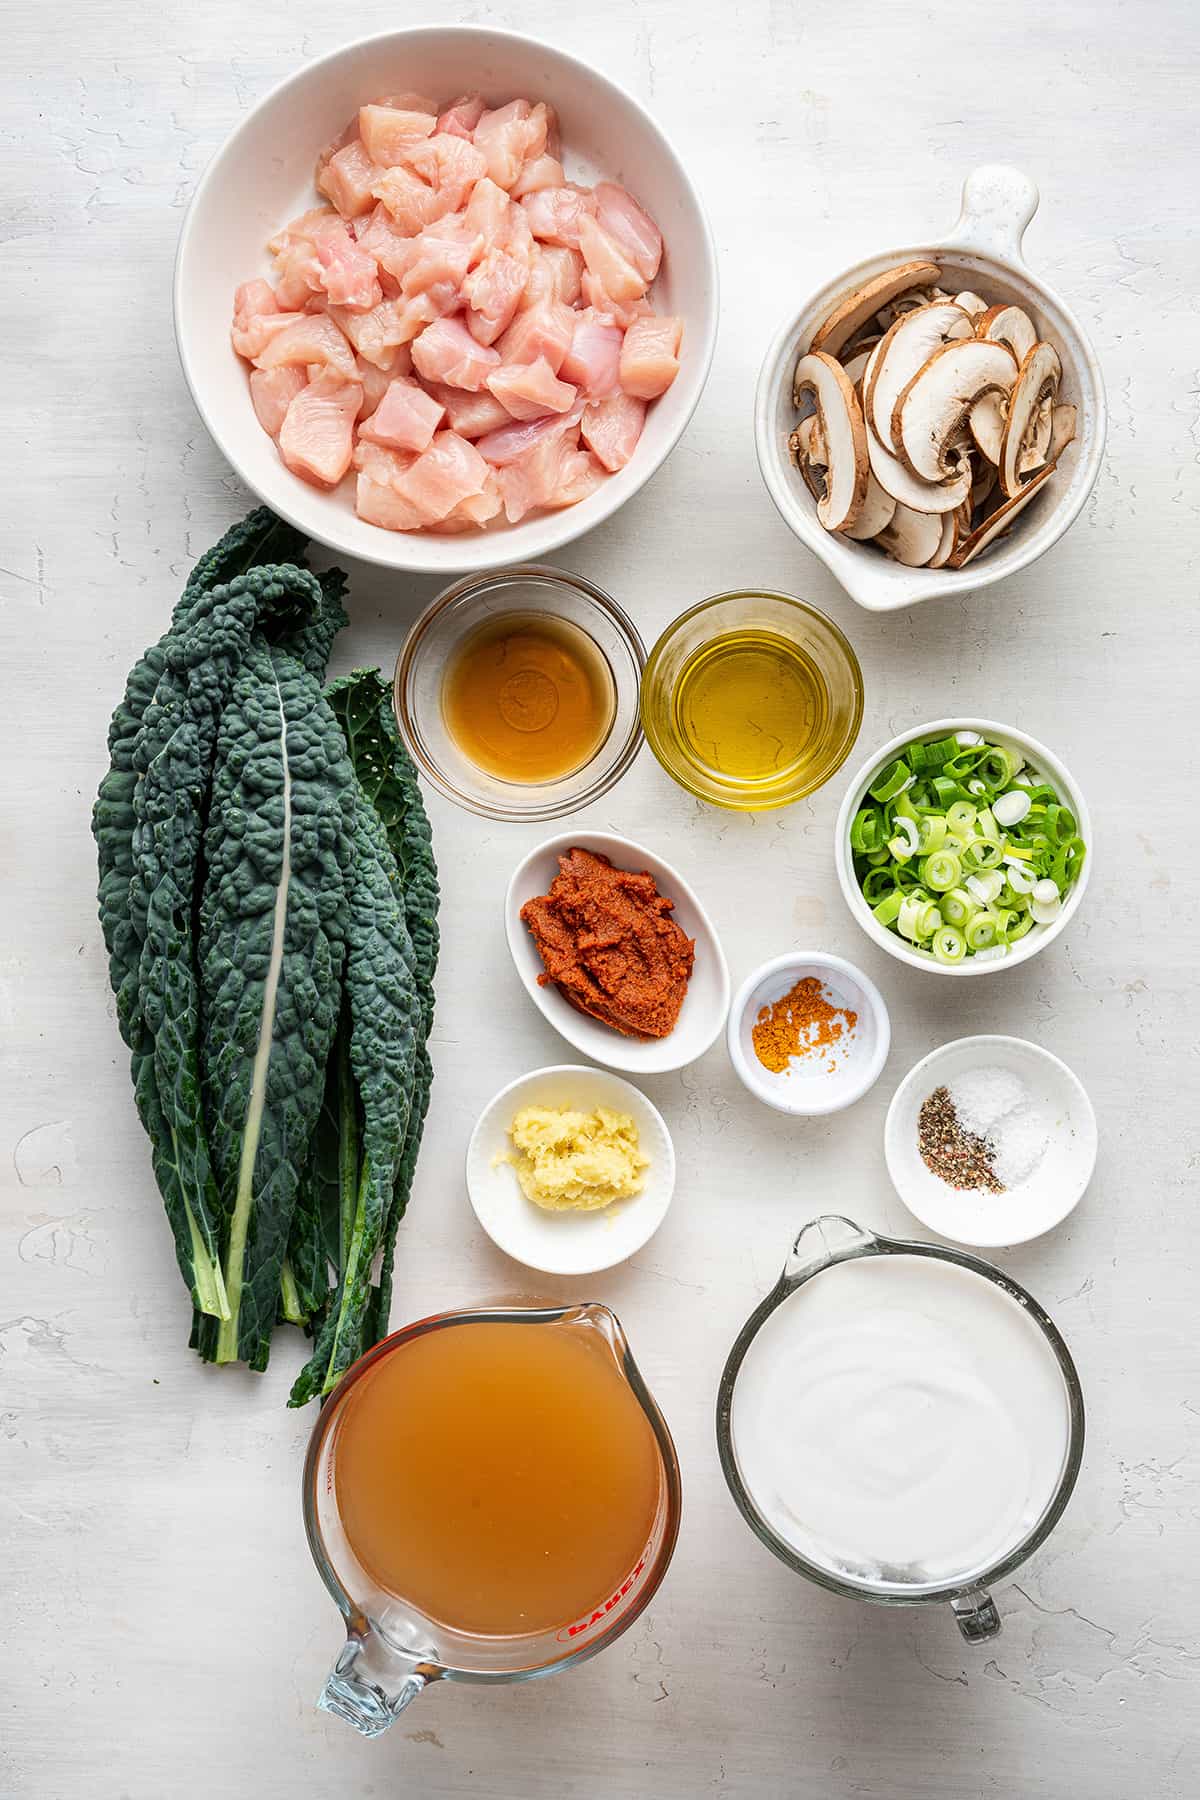 Overhead view of the ingredients needed for Thai coconut curry soup: A bowl of cubed chicken breast, a pyrex of chicken broth, a pyrex of coconut milk, a bowl of mushrooms, a bowl of green onions, a bowl of ginger, a bowl of curry paste, a bowl of oil, a bowl of fish sauce, and some kale leaves.